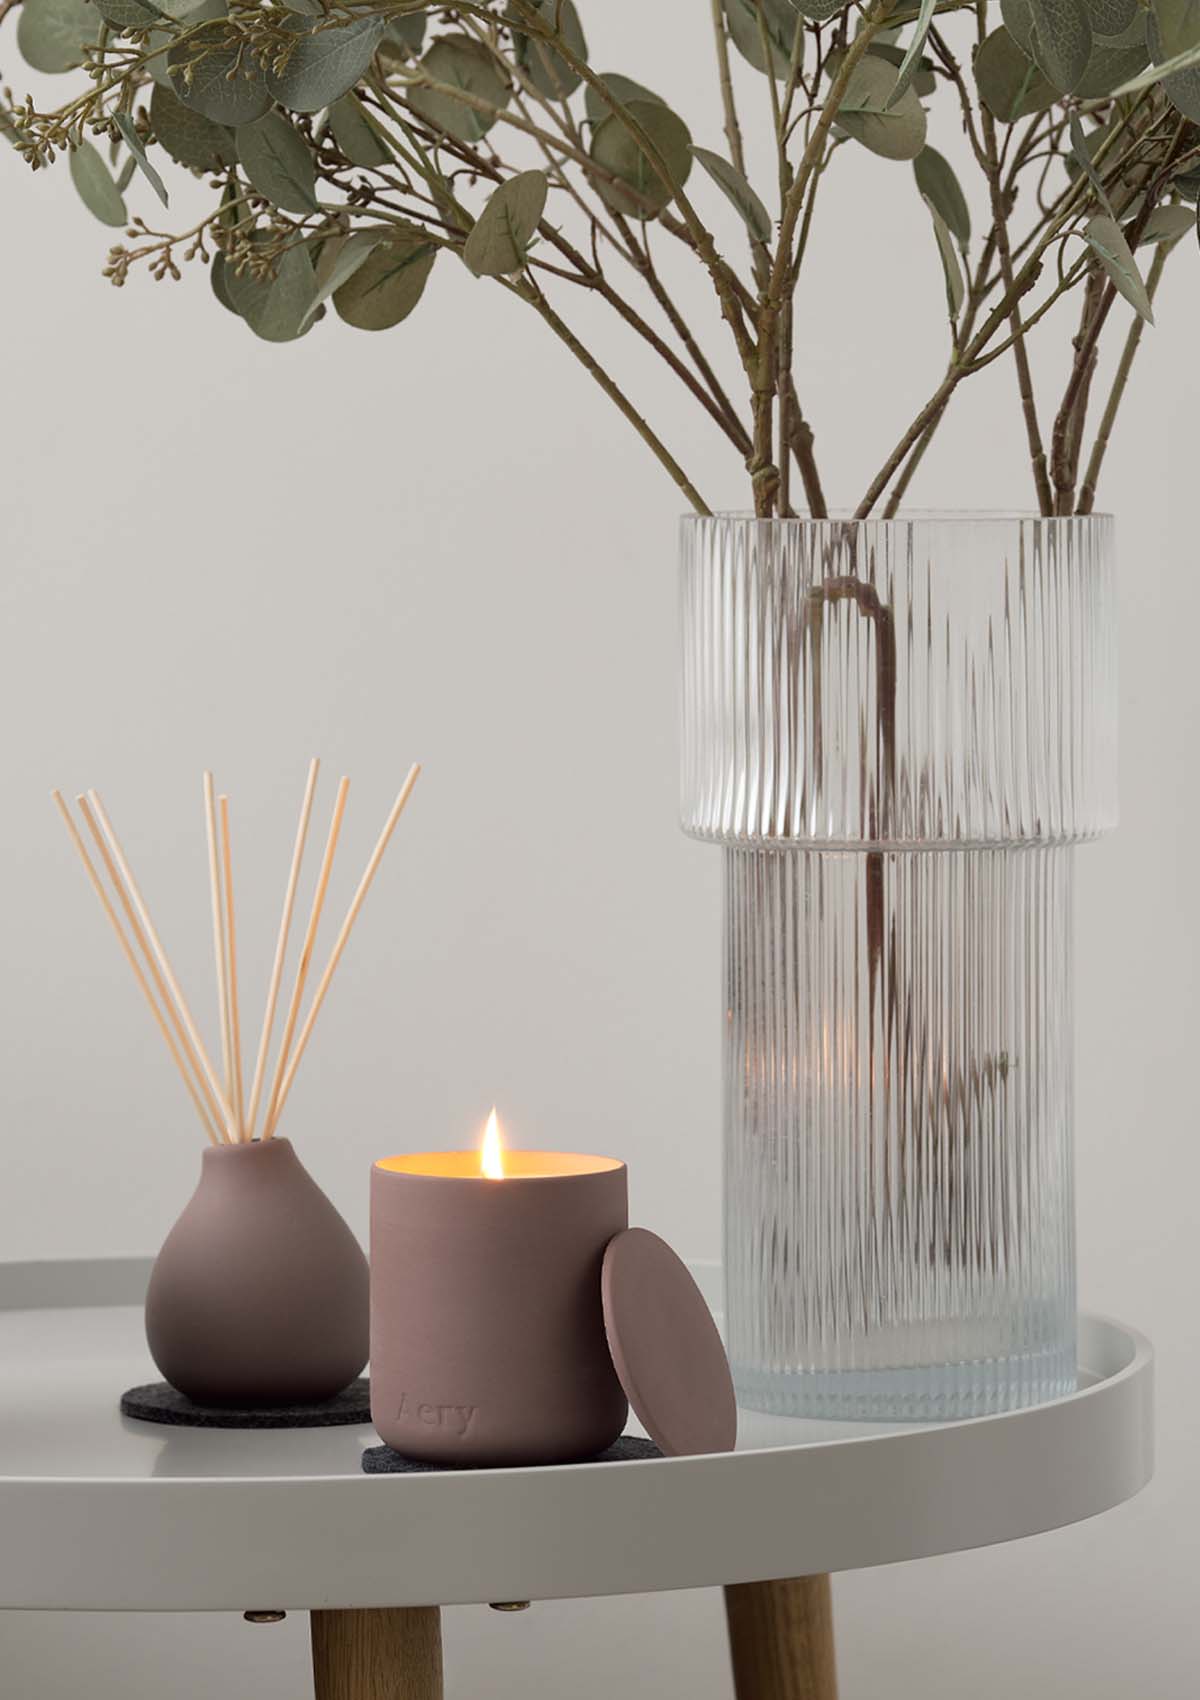 Aubergine moroccan Rose candle by Aery  displayed next to Aubergine Moroccan Rose reed diffuser by Aery and glass vase placed on grey circle table 